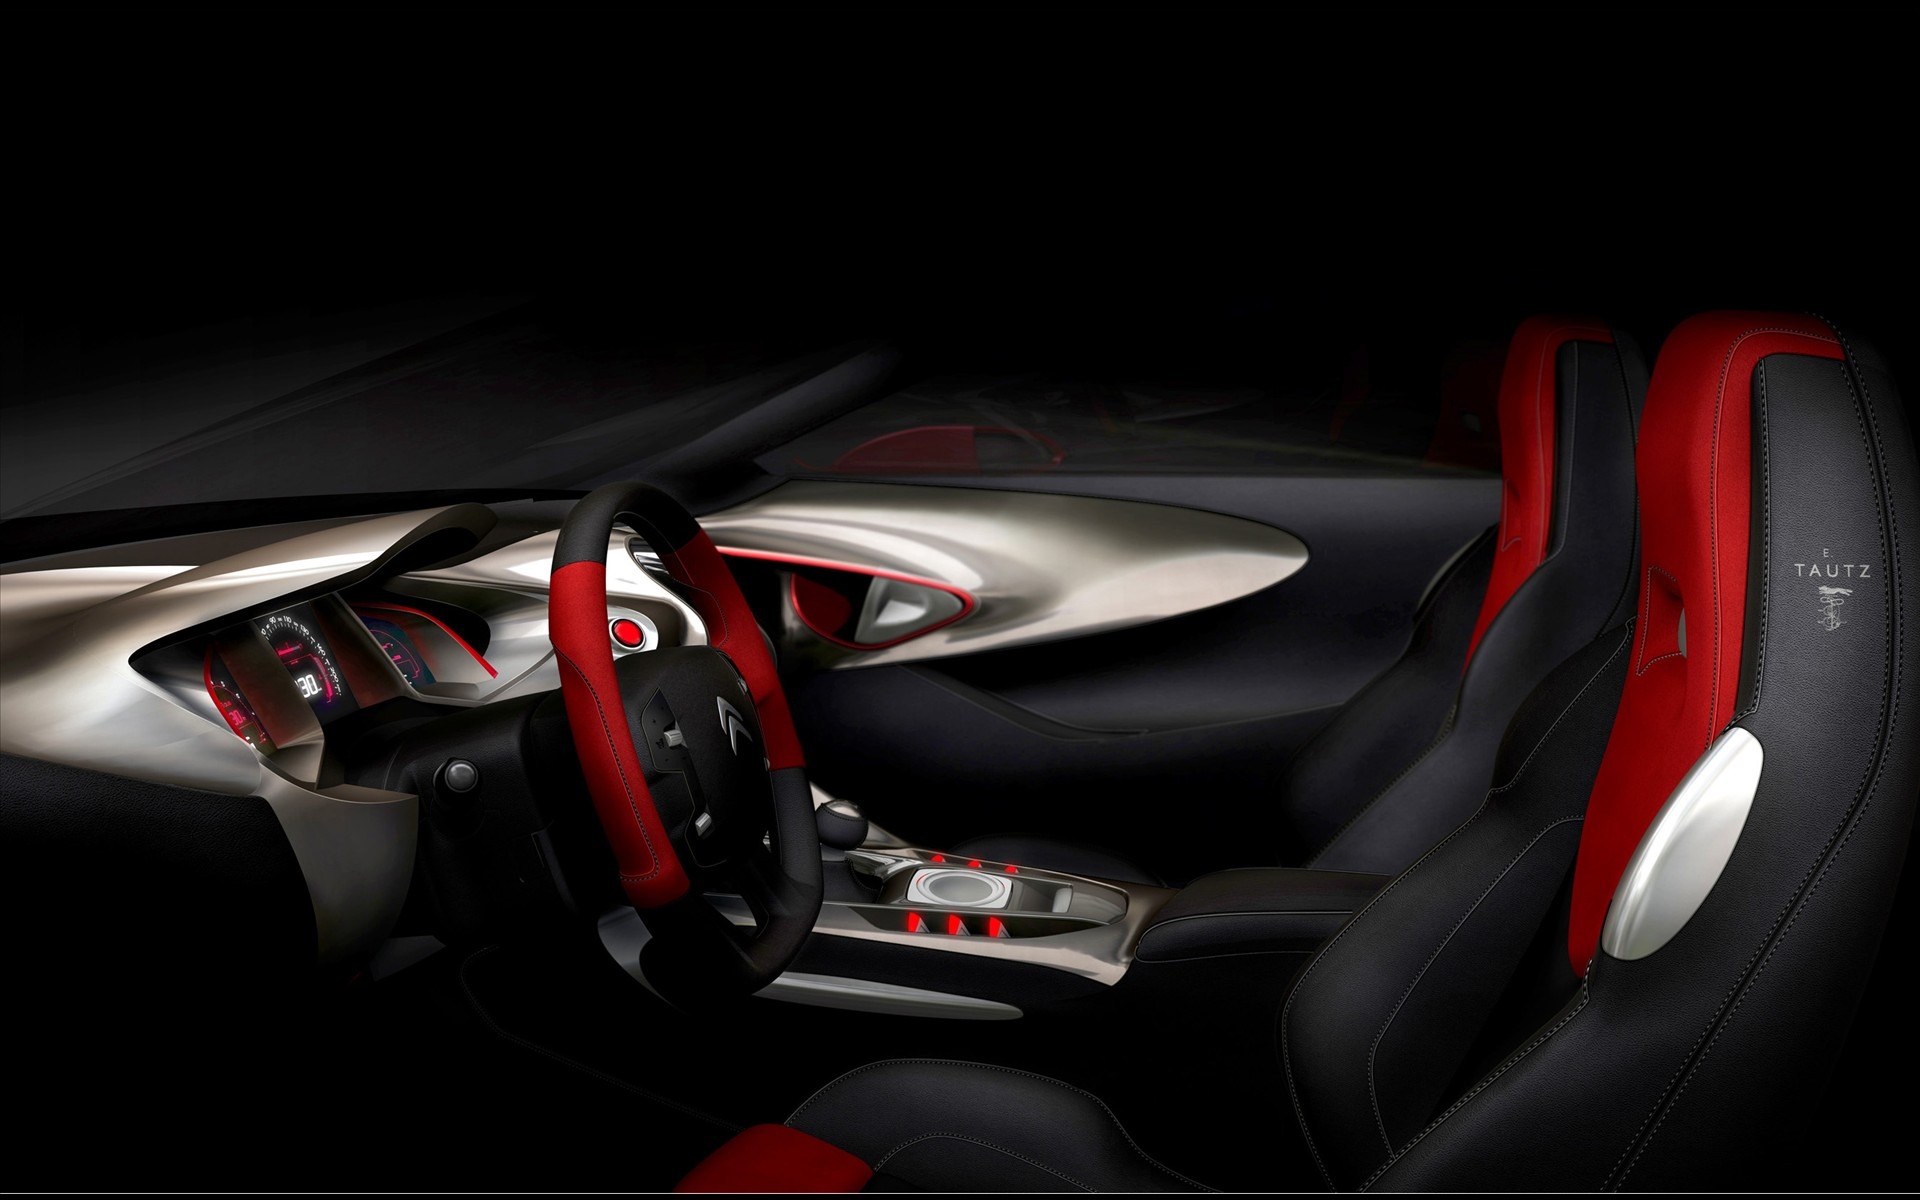 Special edition of concept cars wallpaper (5) #2 - 1920x1200